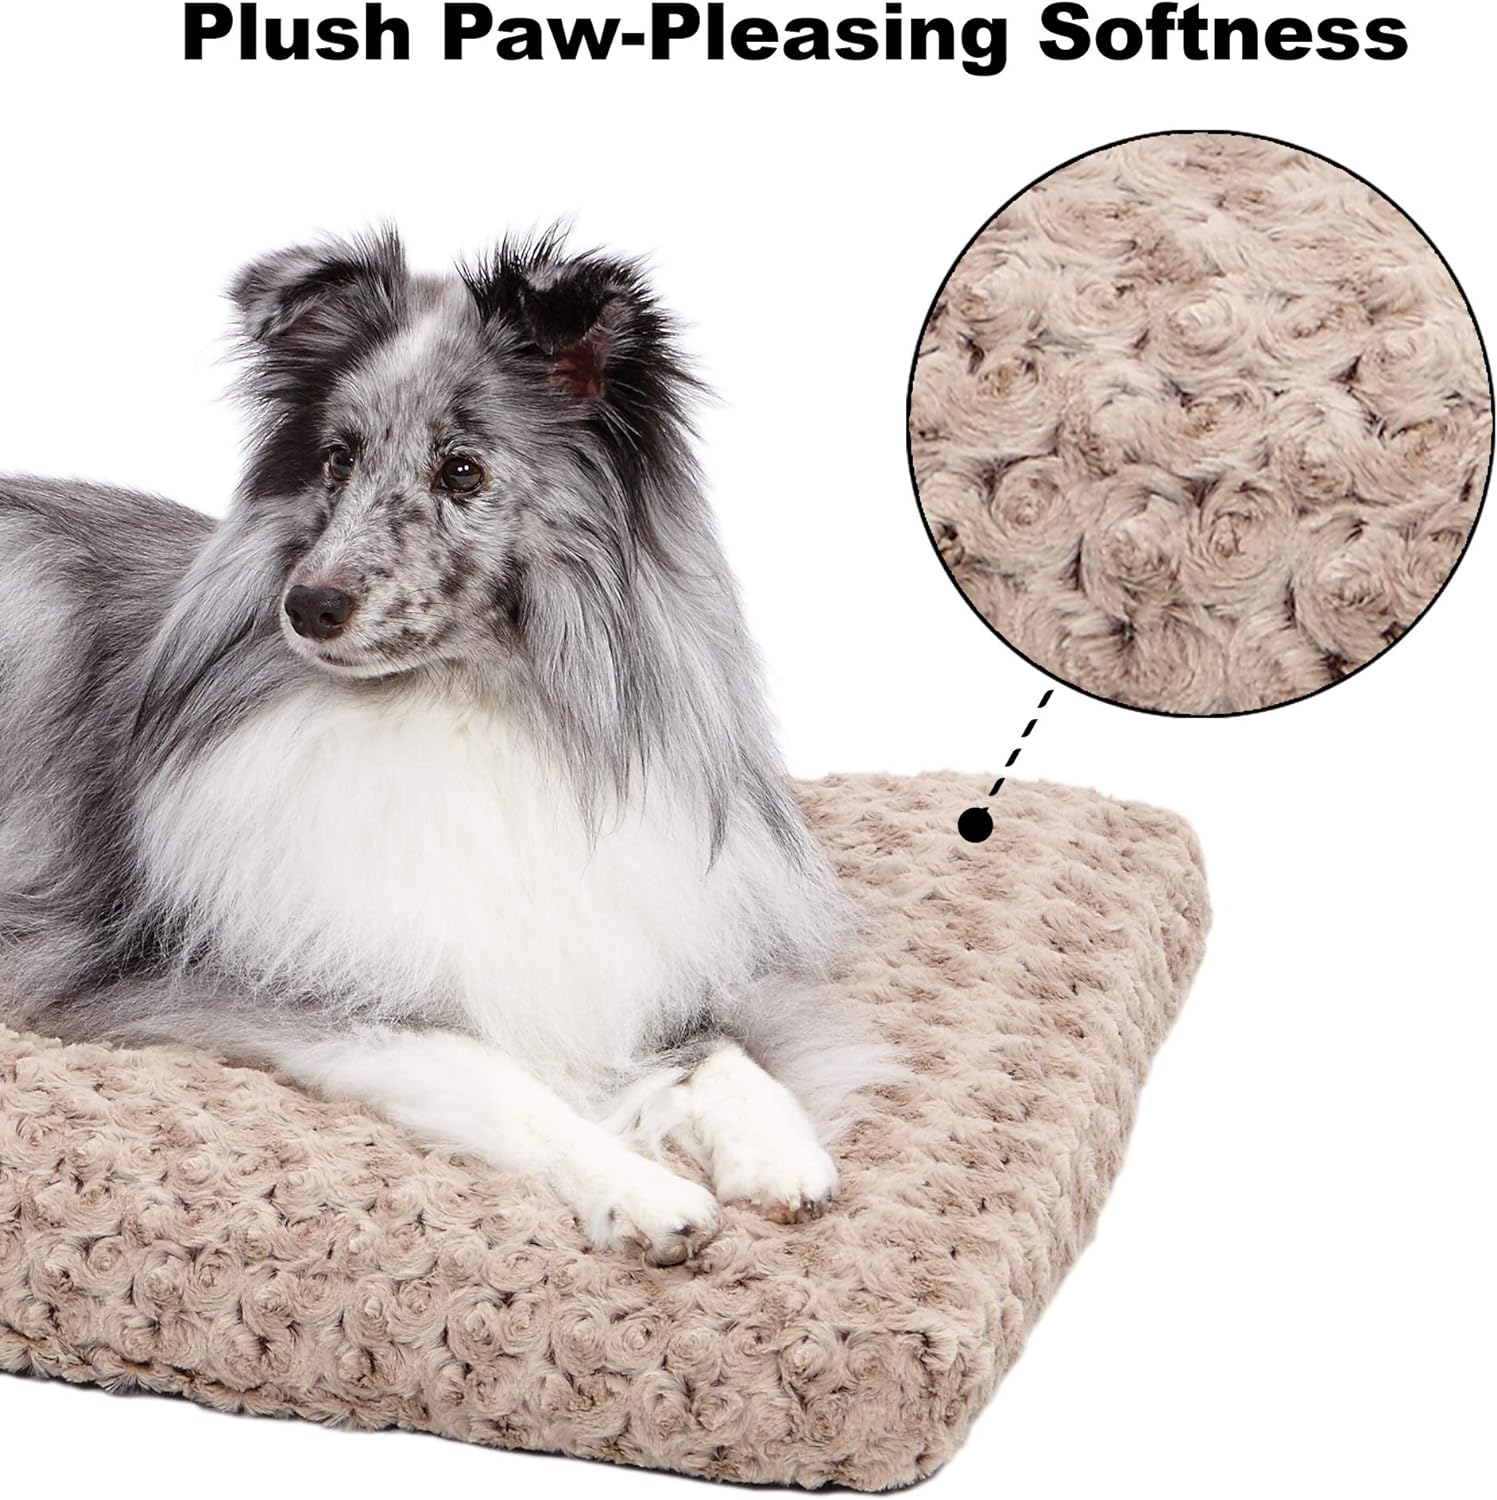 MidWest Homes for Pets Deluxe Dog Beds | Super Plush Dog  Cat Beds Ideal for Dog Crates | Machine Wash  Dryer Friendly, 1-Year Warranty, Mocha, 46.0 L x 28.0 W x 3.0 Th